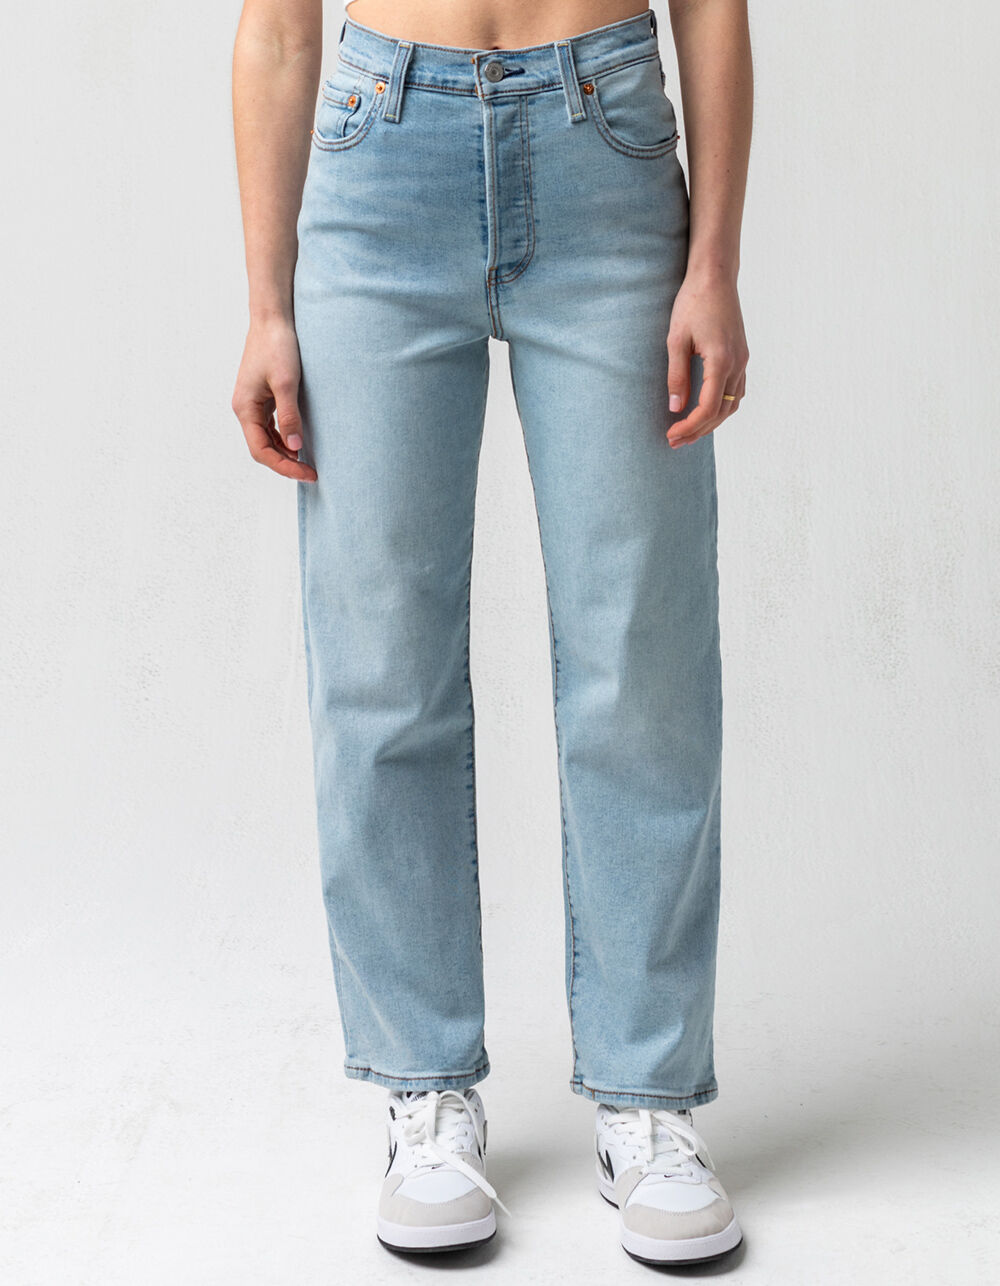 LEVI'S Ribcage Straight Ankle Womens Jeans - LIGHT WASH | Tillys